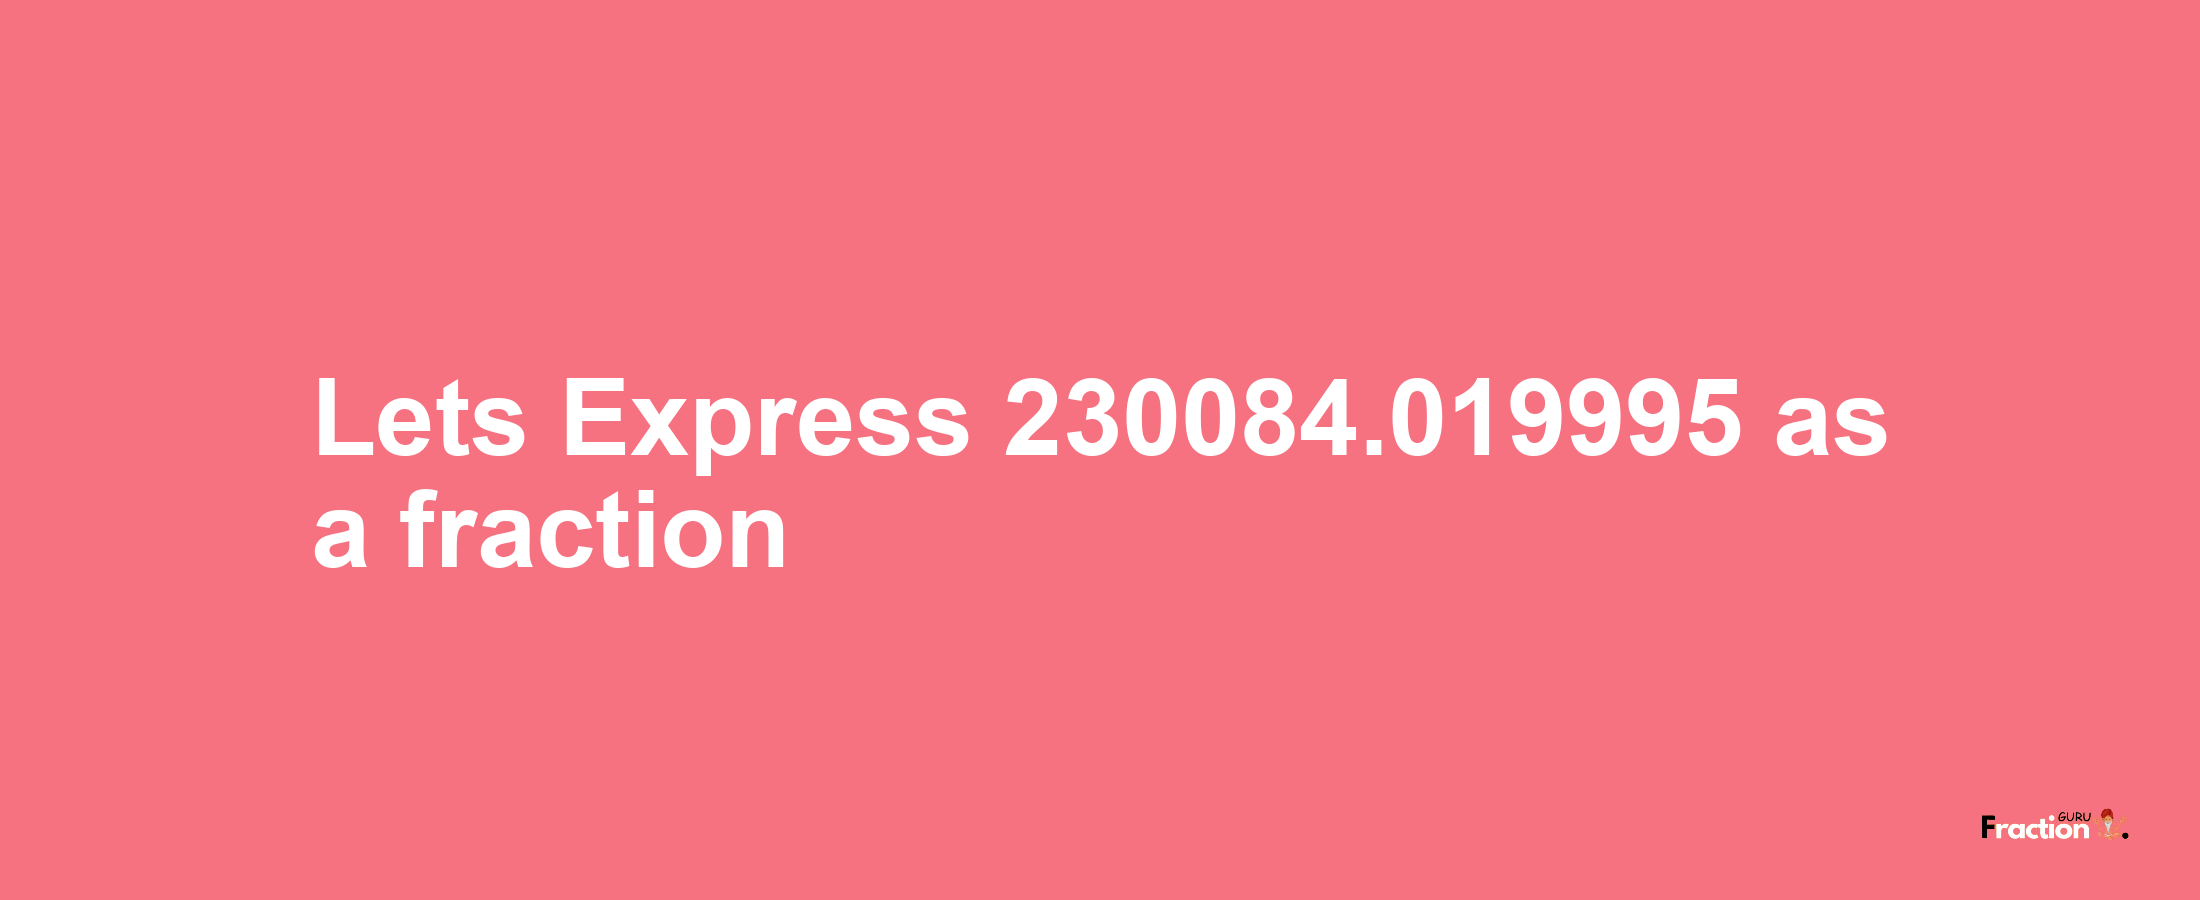 Lets Express 230084.019995 as afraction